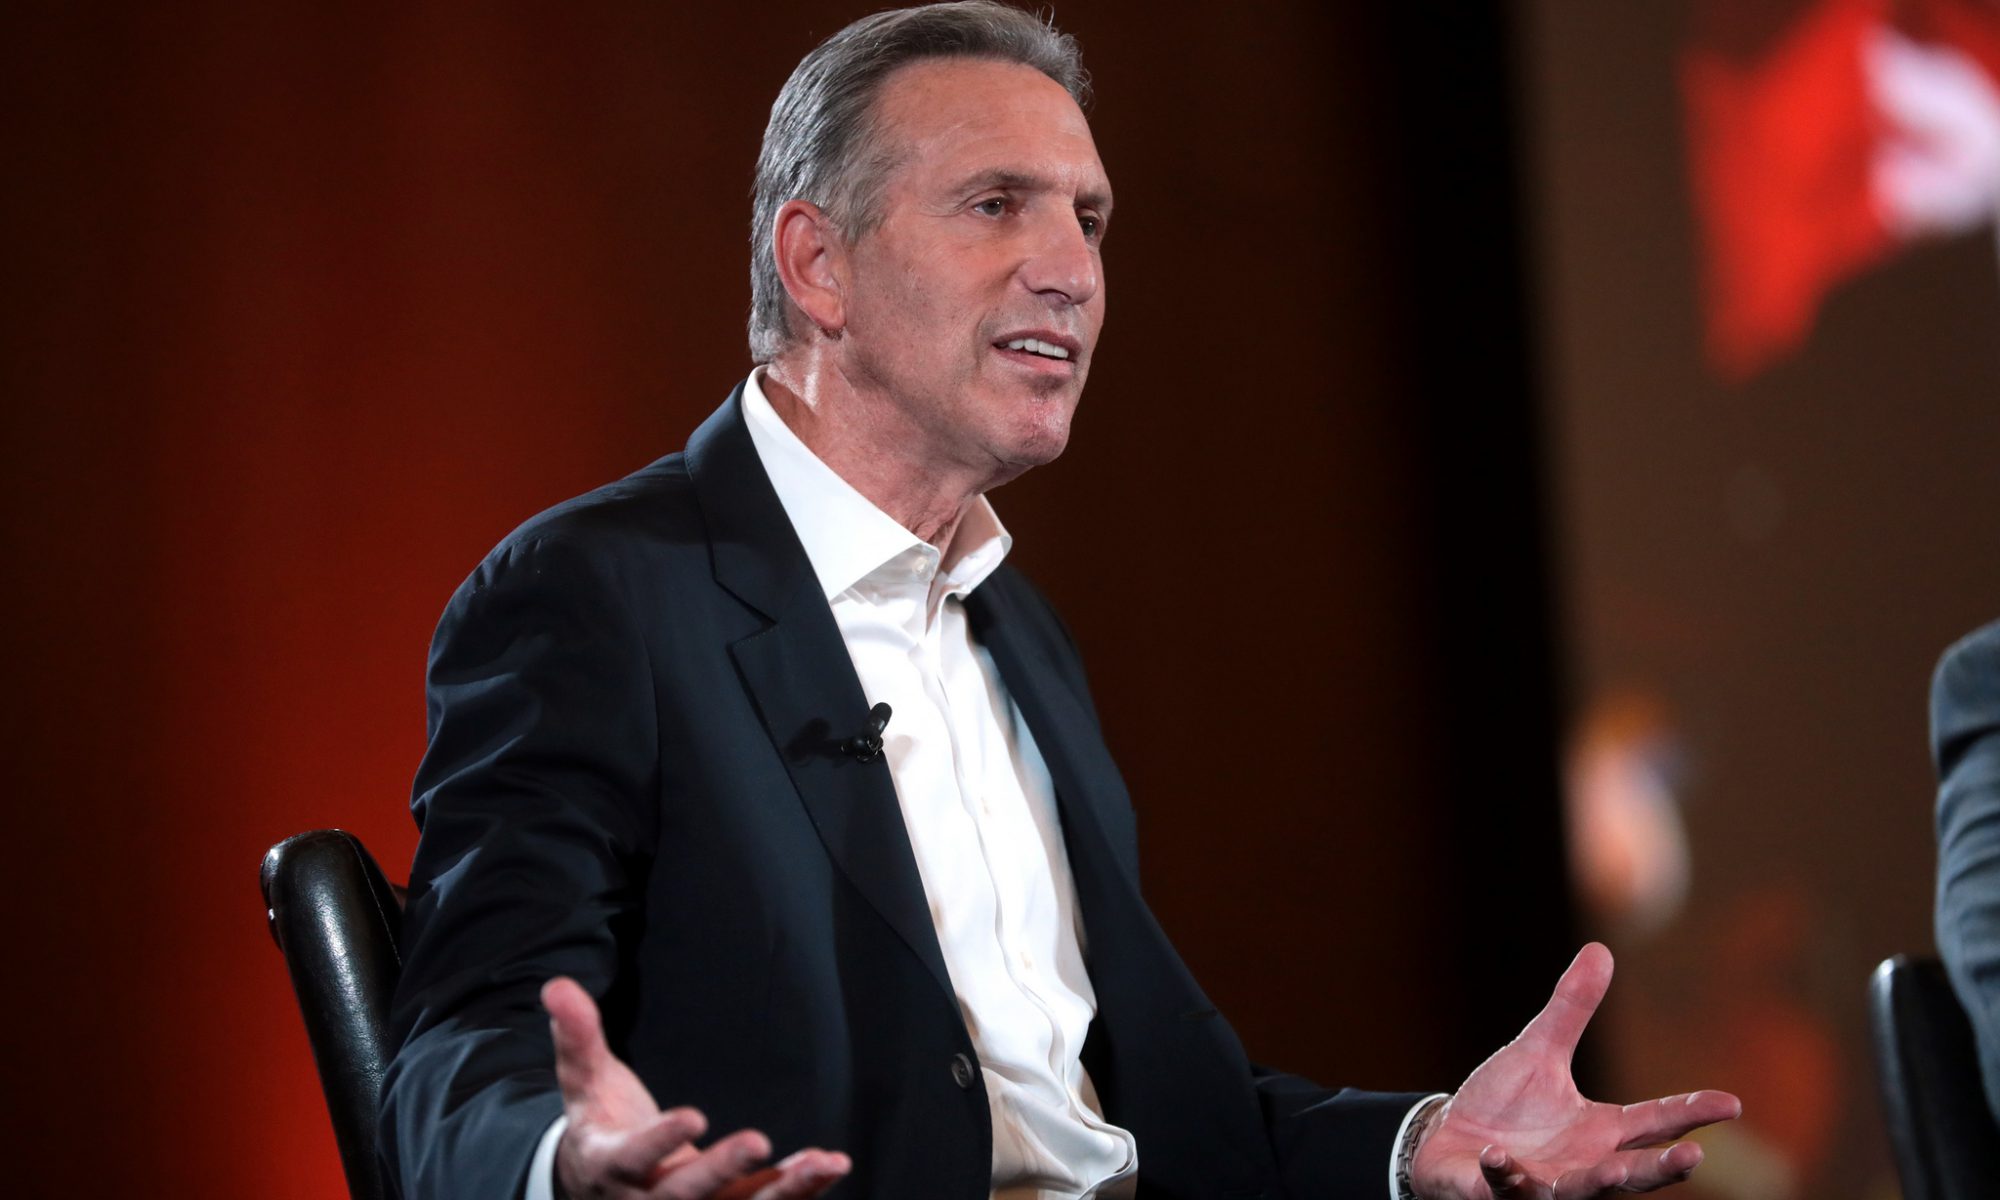 Photograph of former Starbucks CEO sitting on a stage gesturing with his hands spread